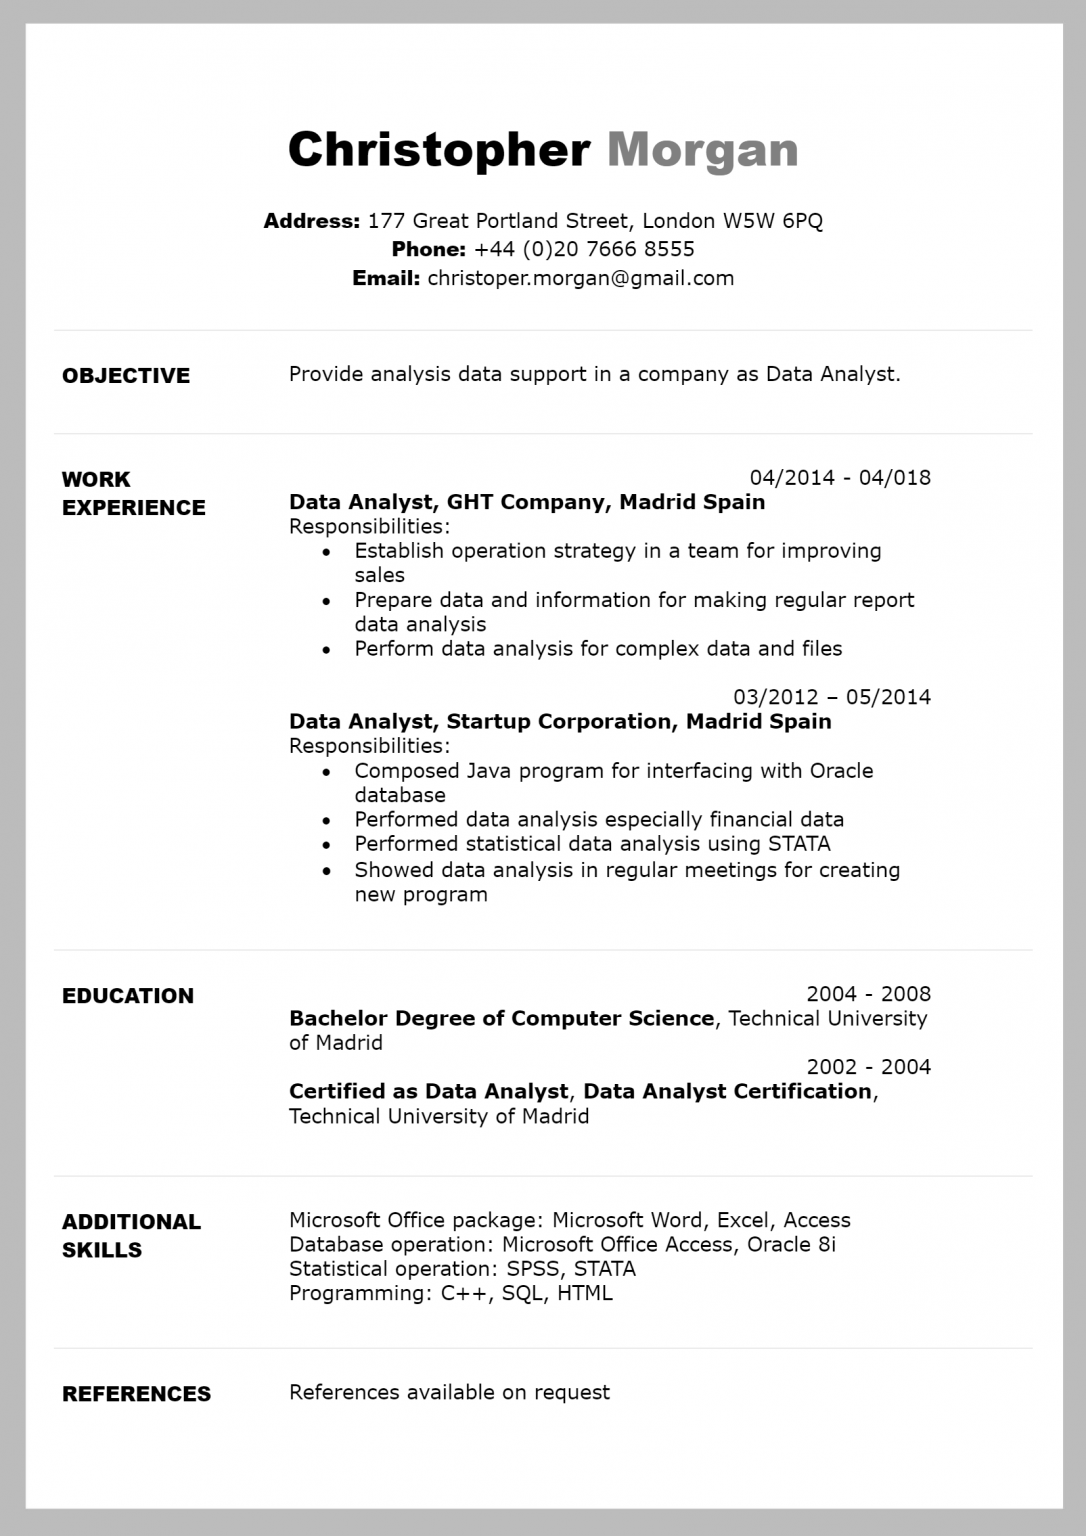 resume template download for data analyst